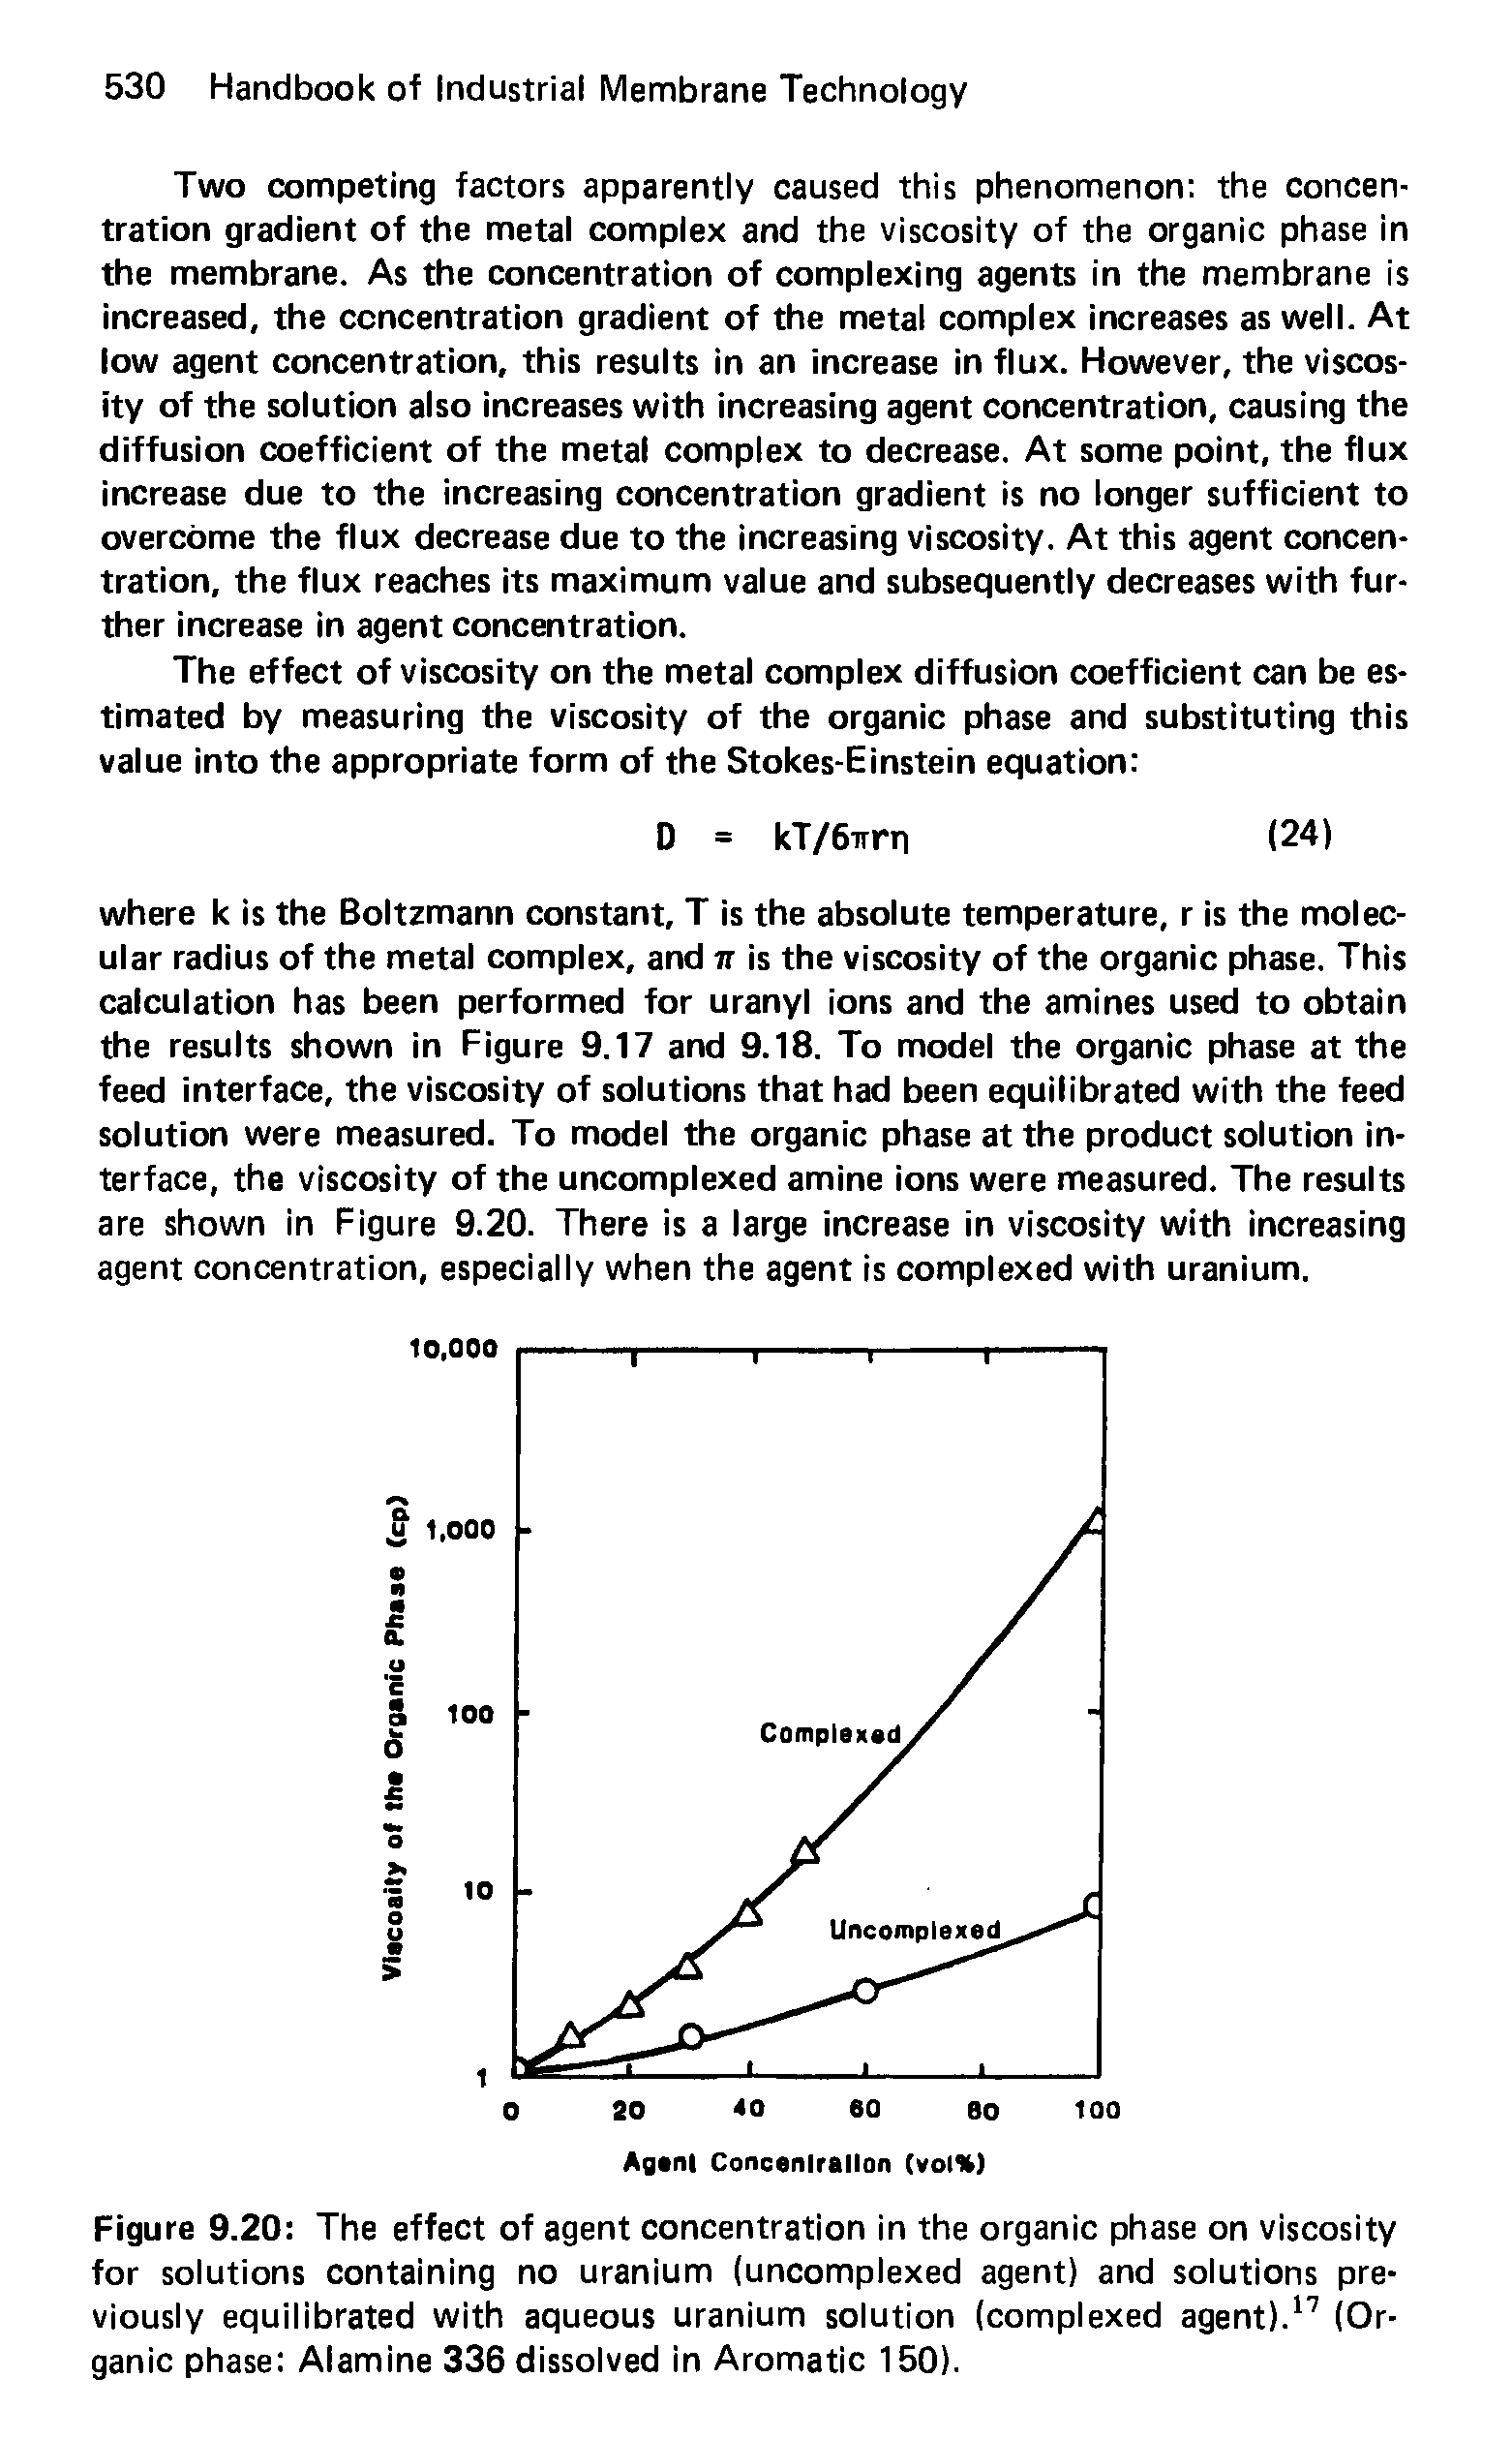 Figure 9.20 The effect of agent concentration in the organic phase on viscosity for solutions containing no uranium (uncomplexed agent) and solutions previously equilibrated with aqueous uranium solution (complexed agent).17 (Organic phase Alamine 336 dissolved in Aromatic 150).